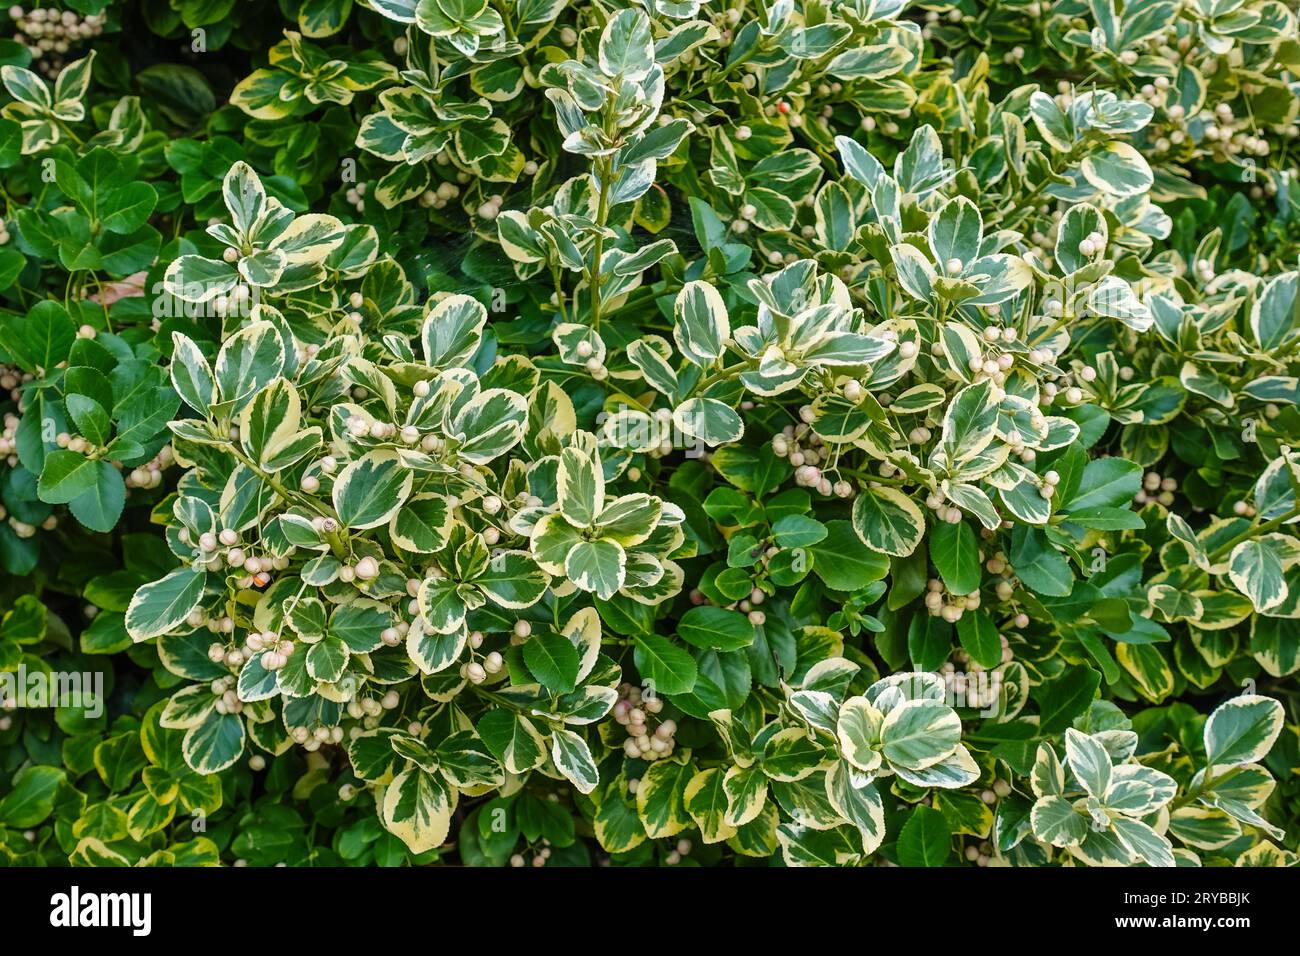 Euonymus fortunei ‘Silver Queen’ (Wintercreeper) is a bushy evergreen shrub with glossy, elongated, dark green leaves adorned with contrasting white m Stock Photo